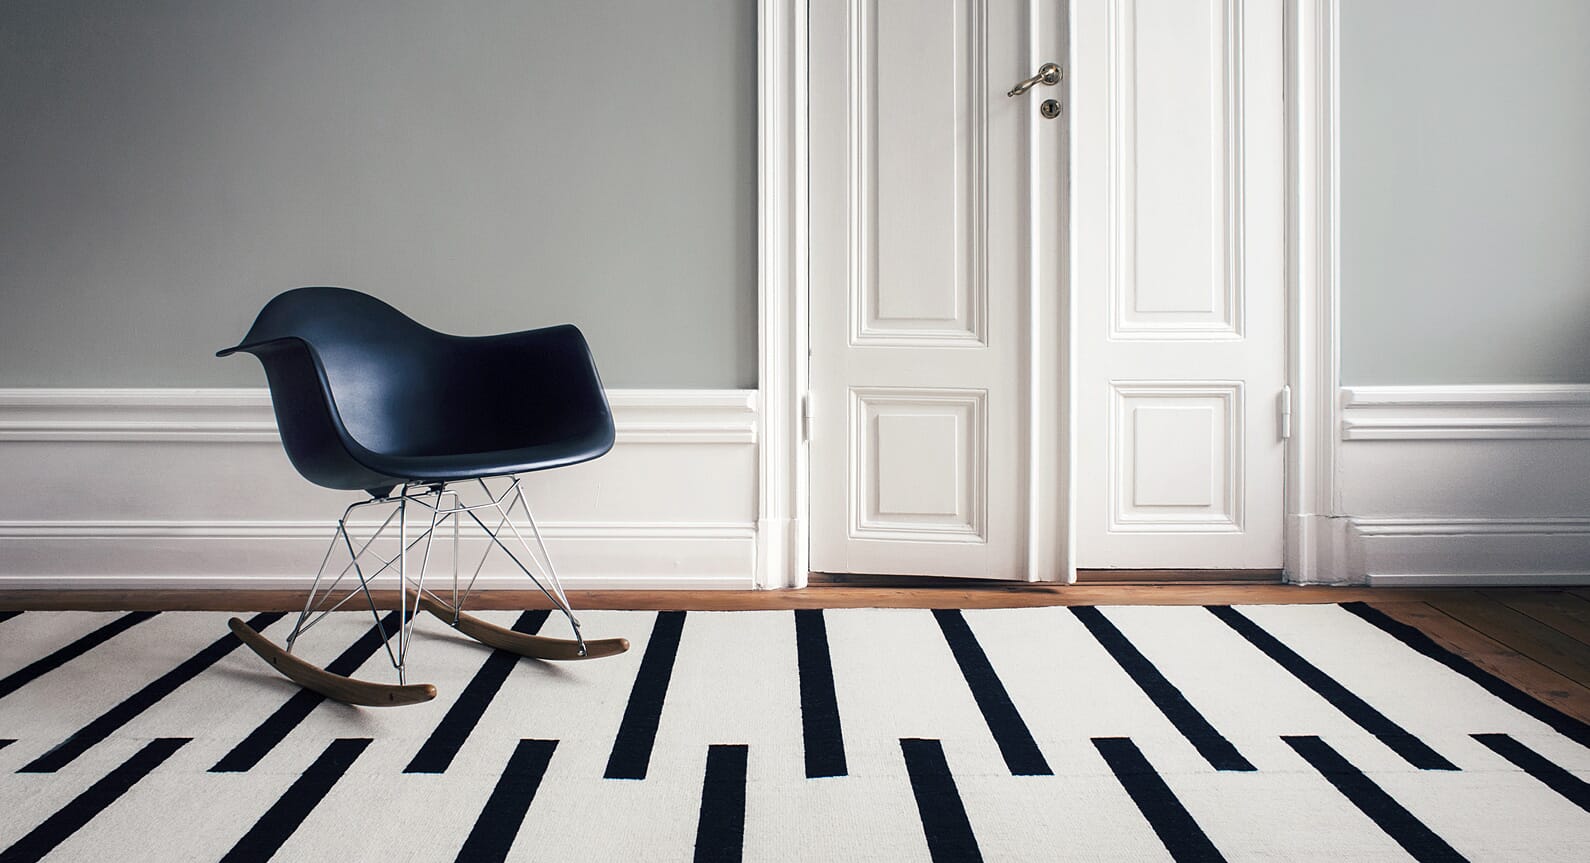 Home Comforts: Introducing The Scandi-Inspired Rugs Of Nordic Knots